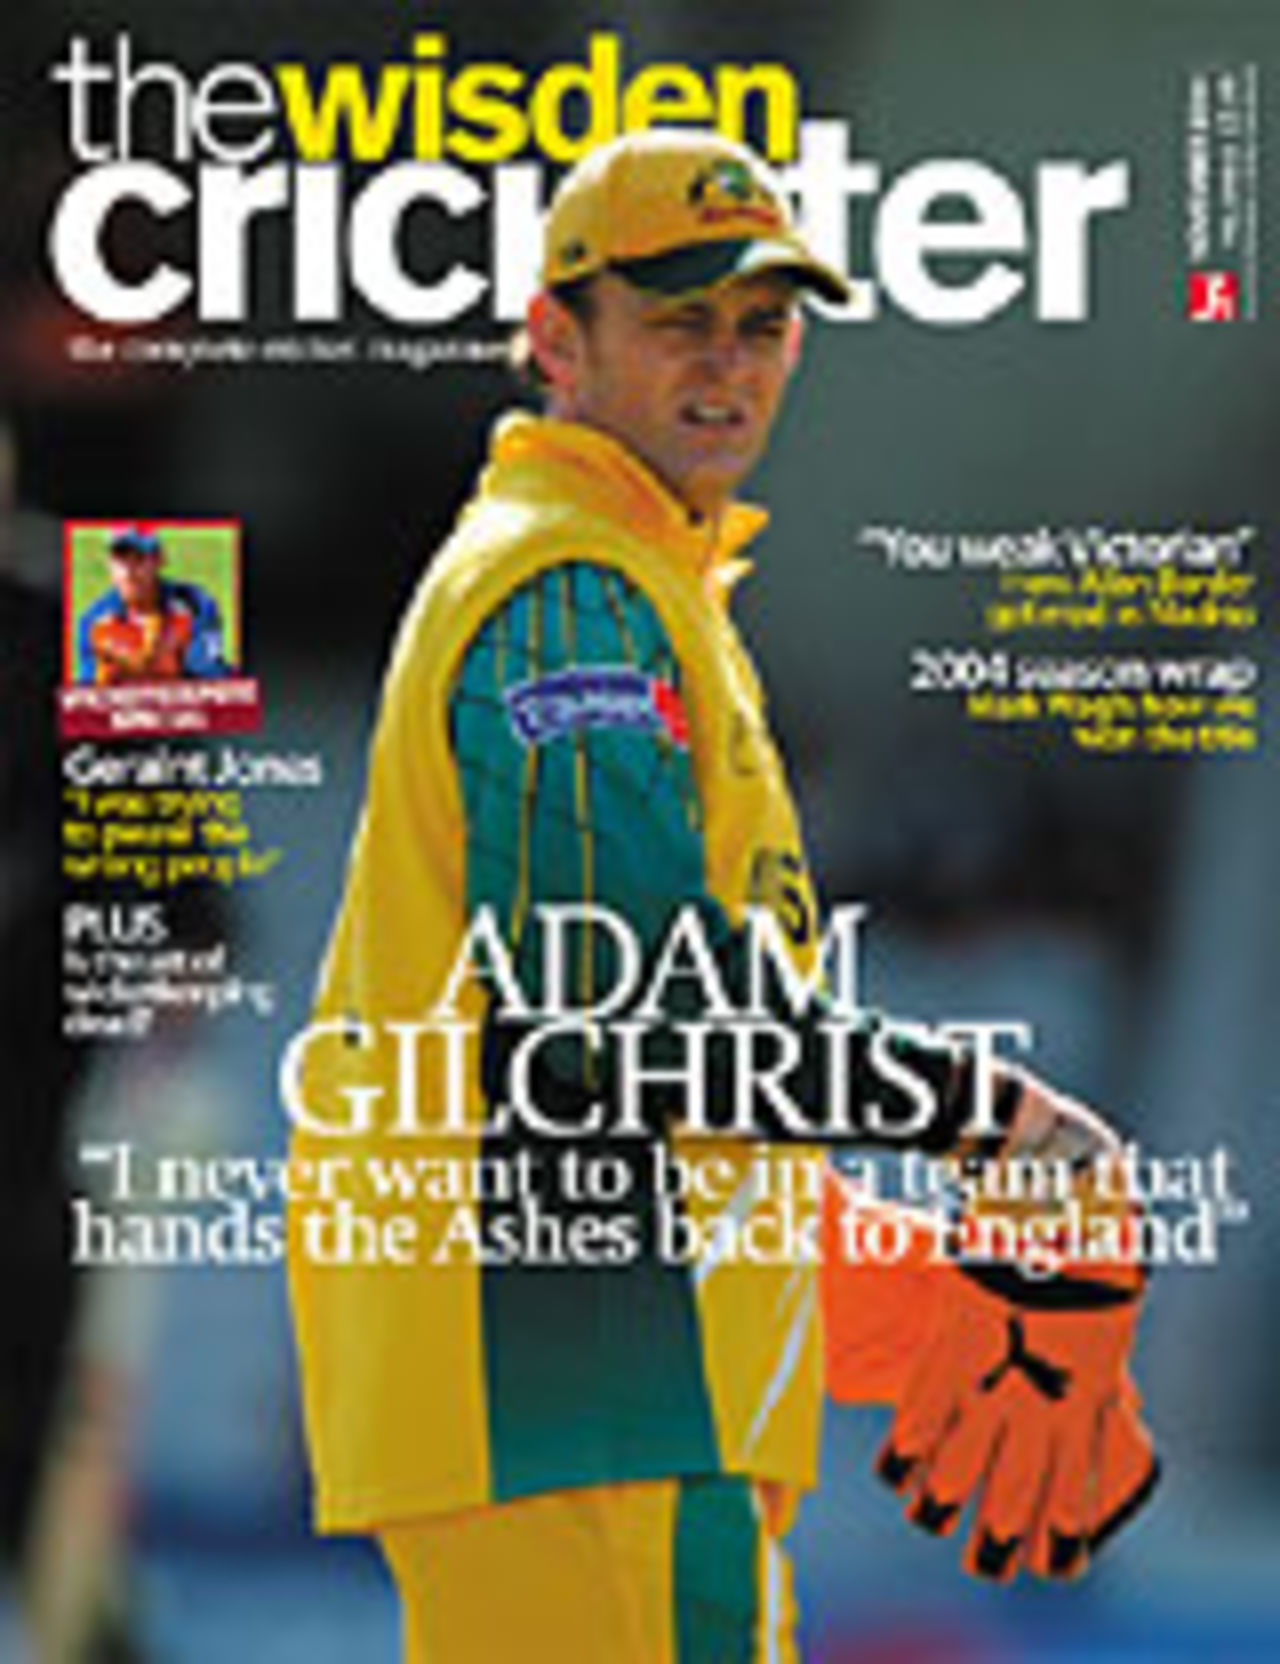 The Wisden Cricketer November issue cover